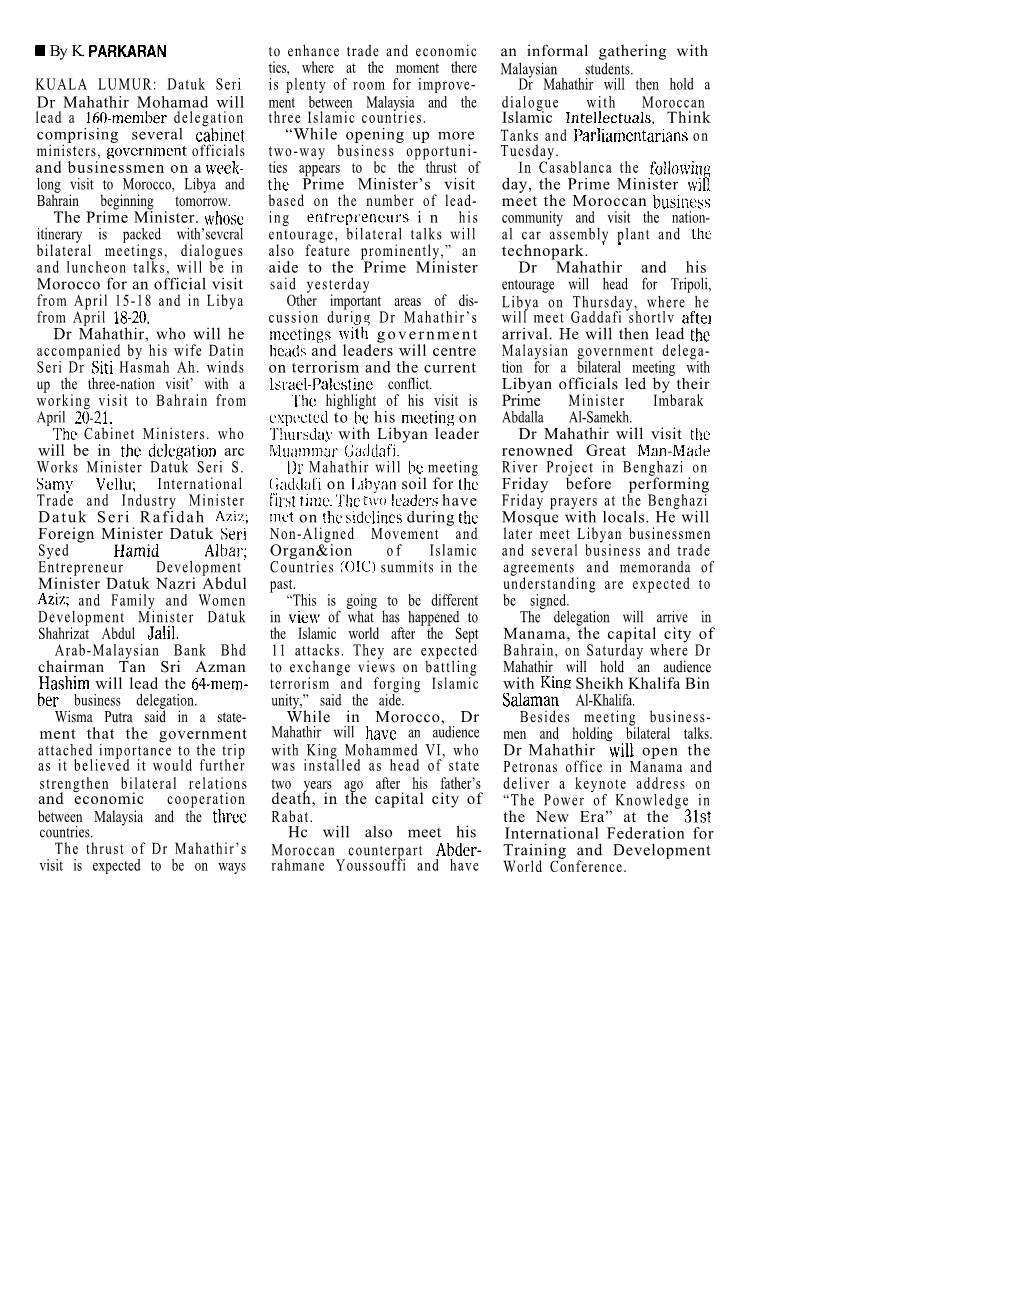 PM to Forge Ties with Three States P2 (The Star 14/04/2002)